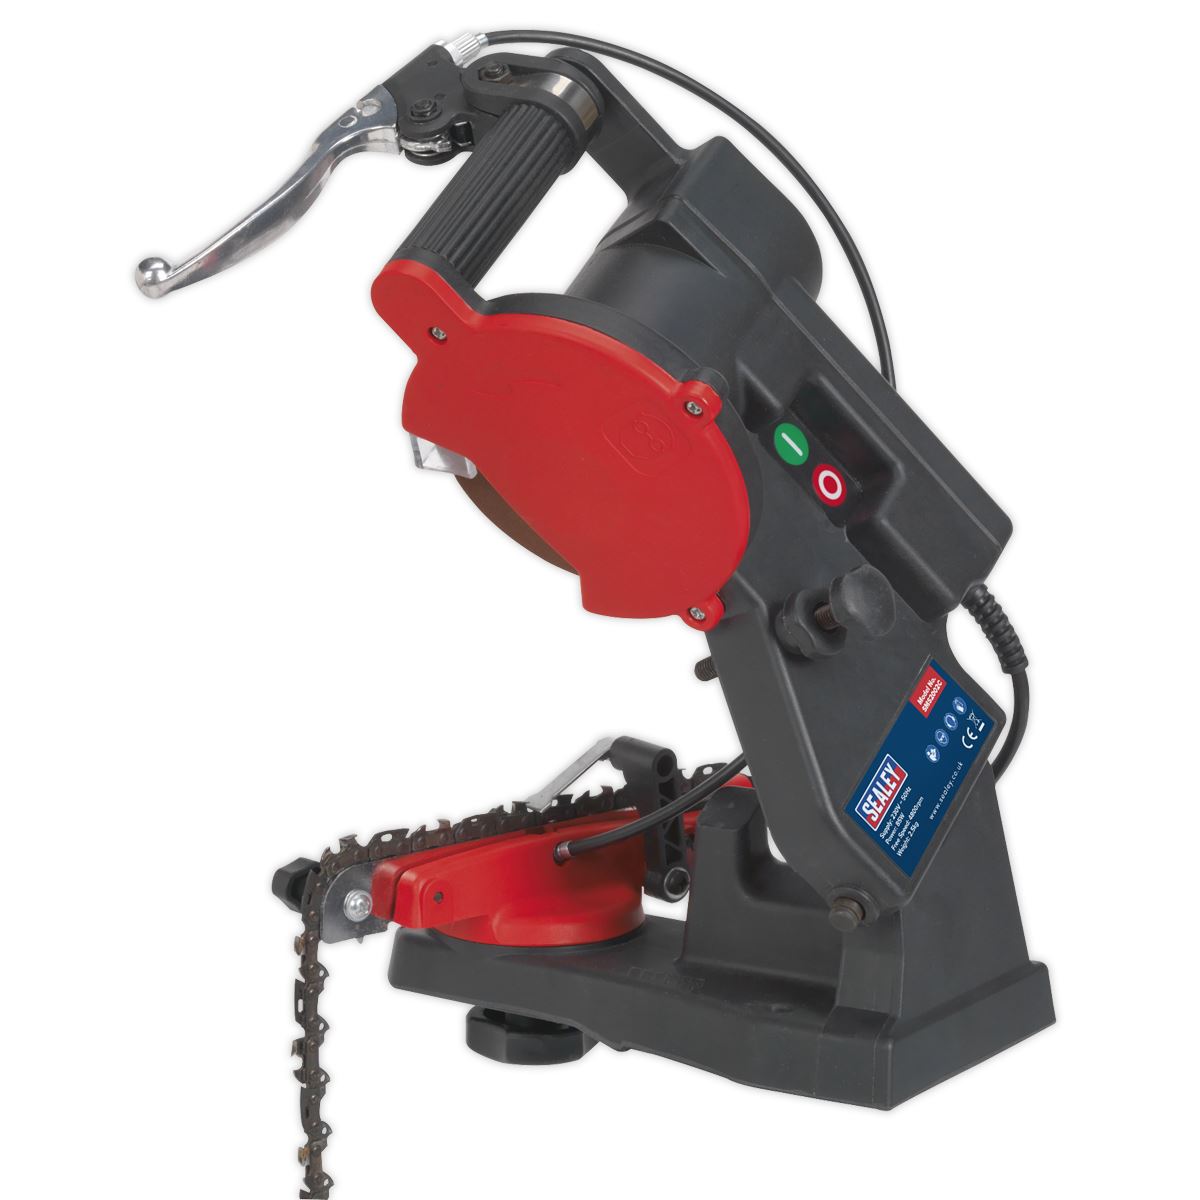 Sealey Chainsaw Blade Sharpener - Quick Locating 85W